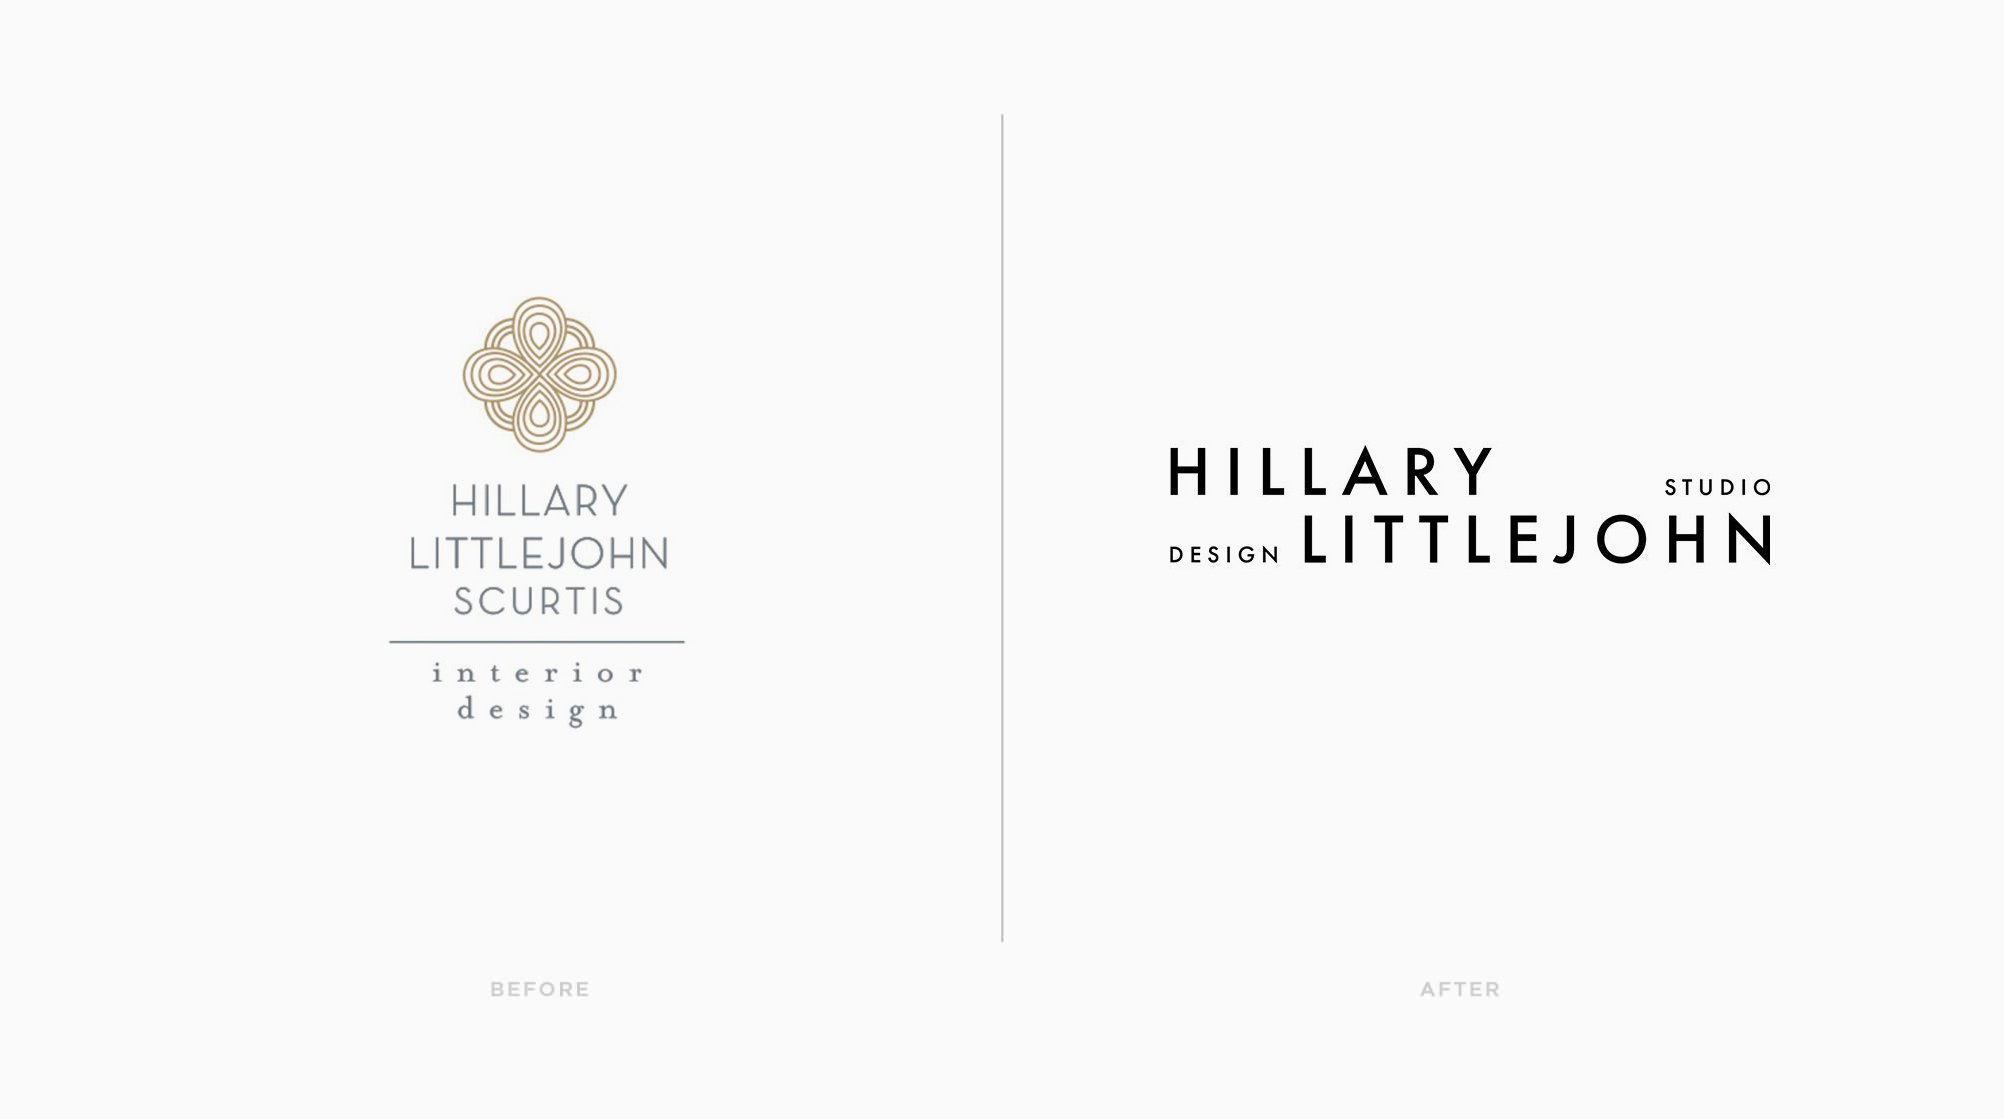 Hillary Littlejohn Studio Design logo before and after